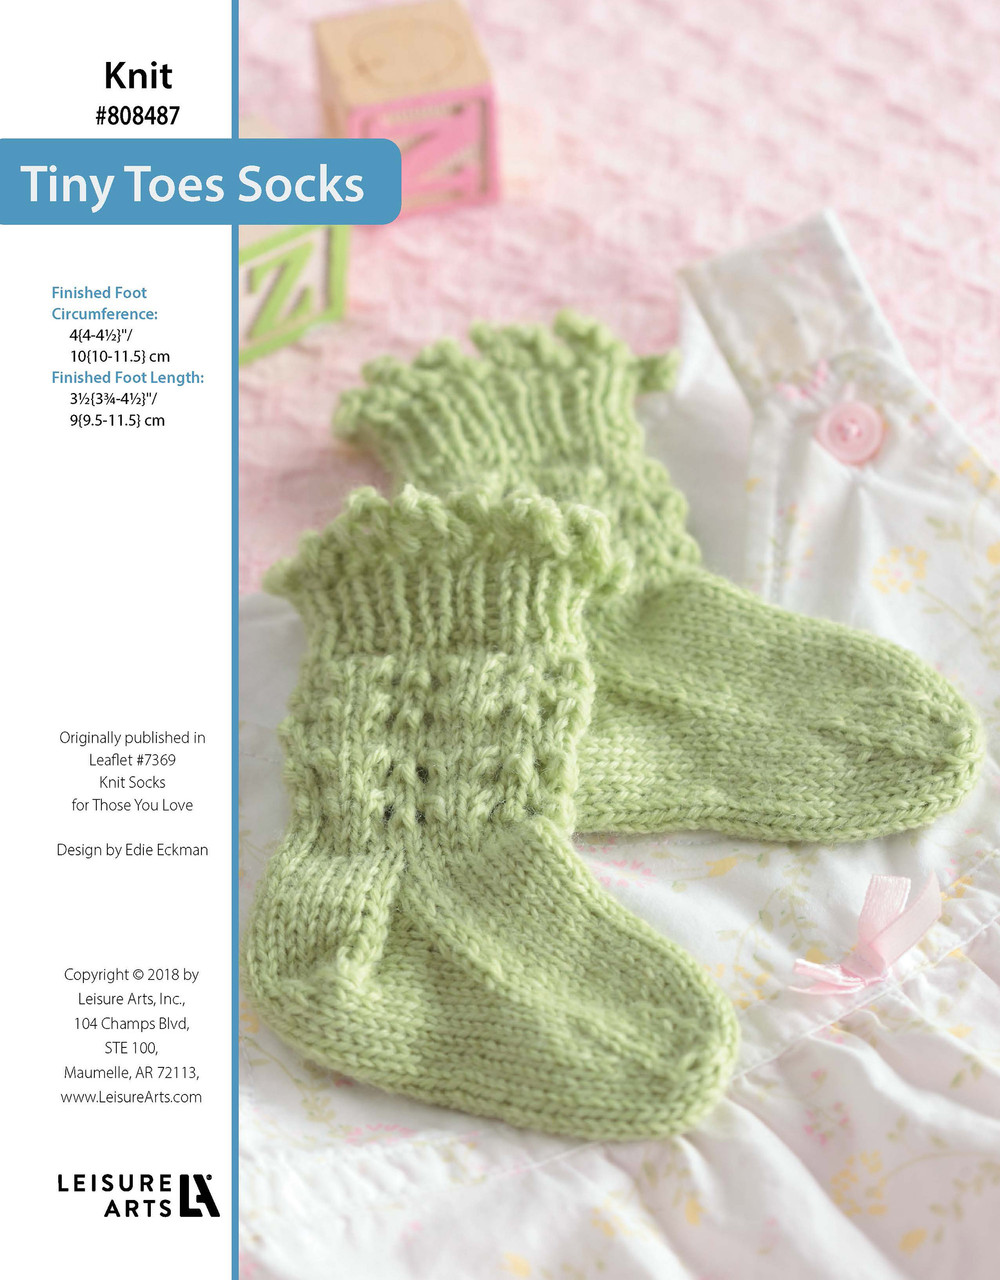 Leisure Arts Knit Socks For Those You Love Tiny Toes Socks ePattern